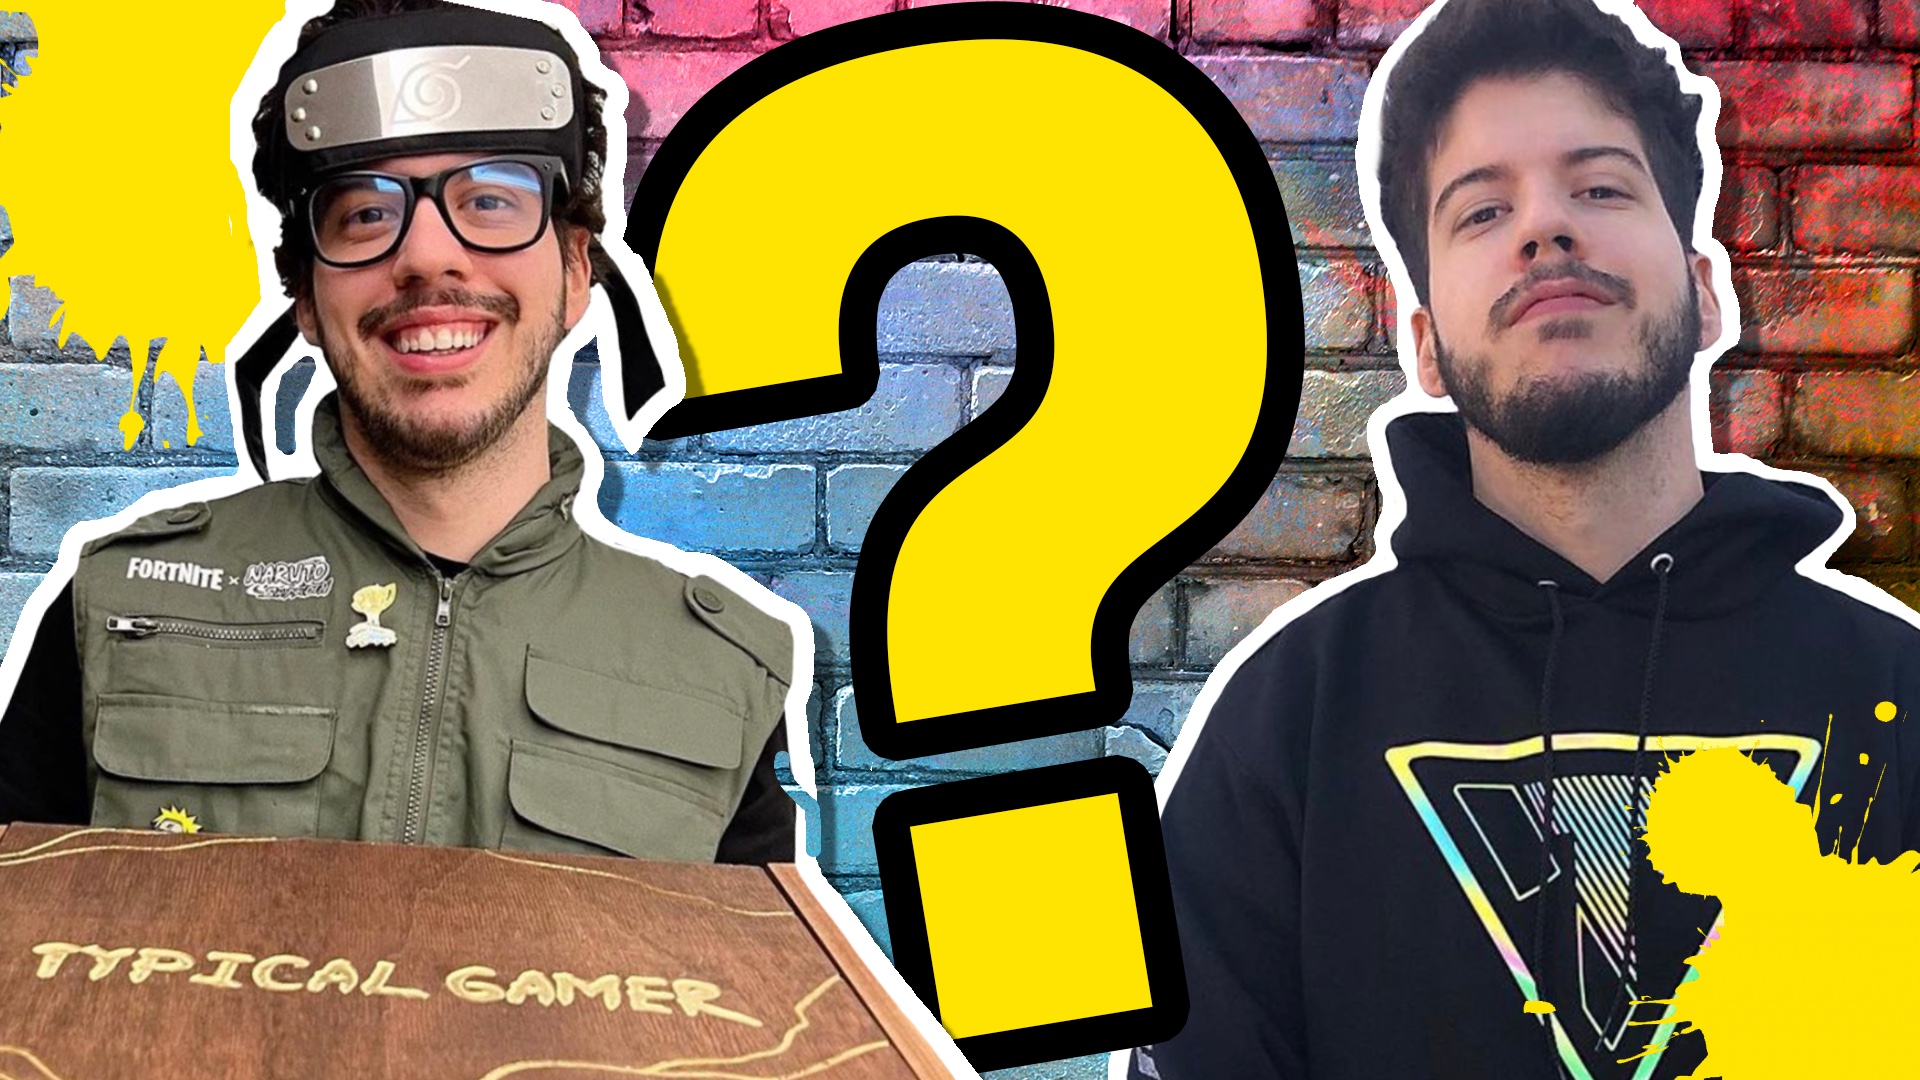 Typical Gamer (@typicalgamer) • Instagram photos and videos